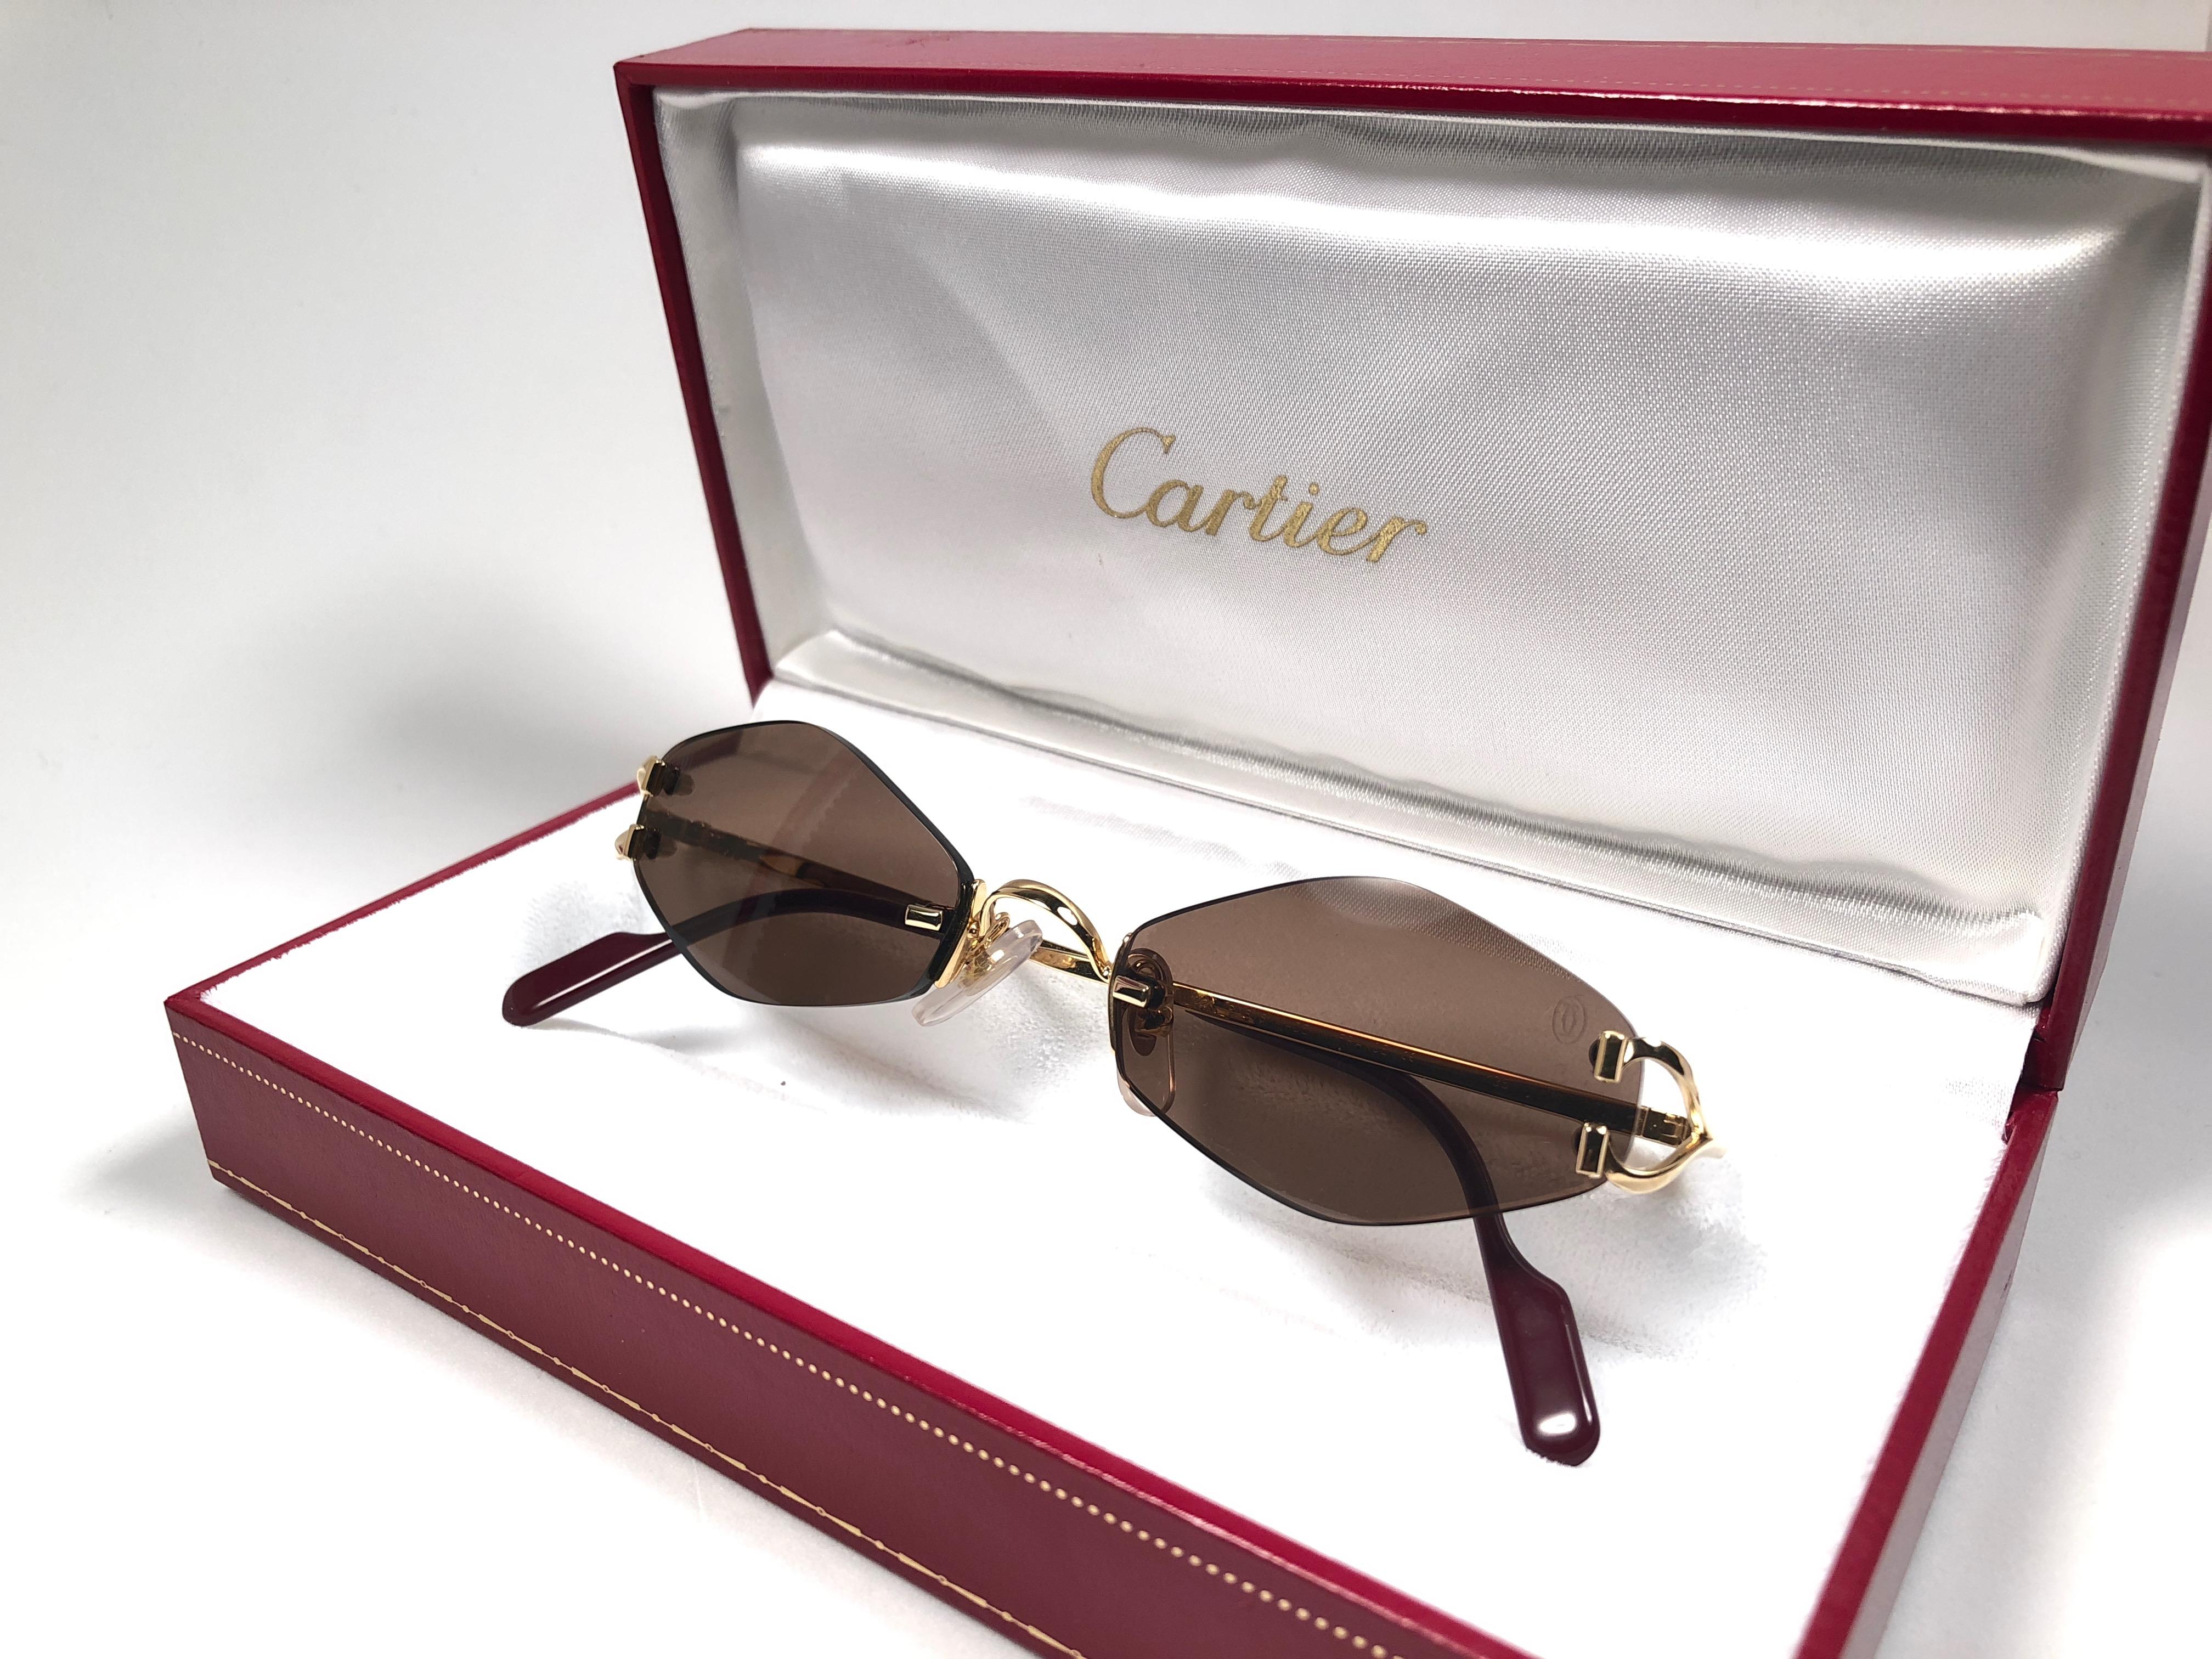 New 1990 Cartier Soho unique rimless sunglasses with brown original Cartier  (uv protection) lenses. Frame with the front and sides in gold.  All hallmarks. Cartier gold signs on the honey brown ear paddles. These are like a pair of jewels on your